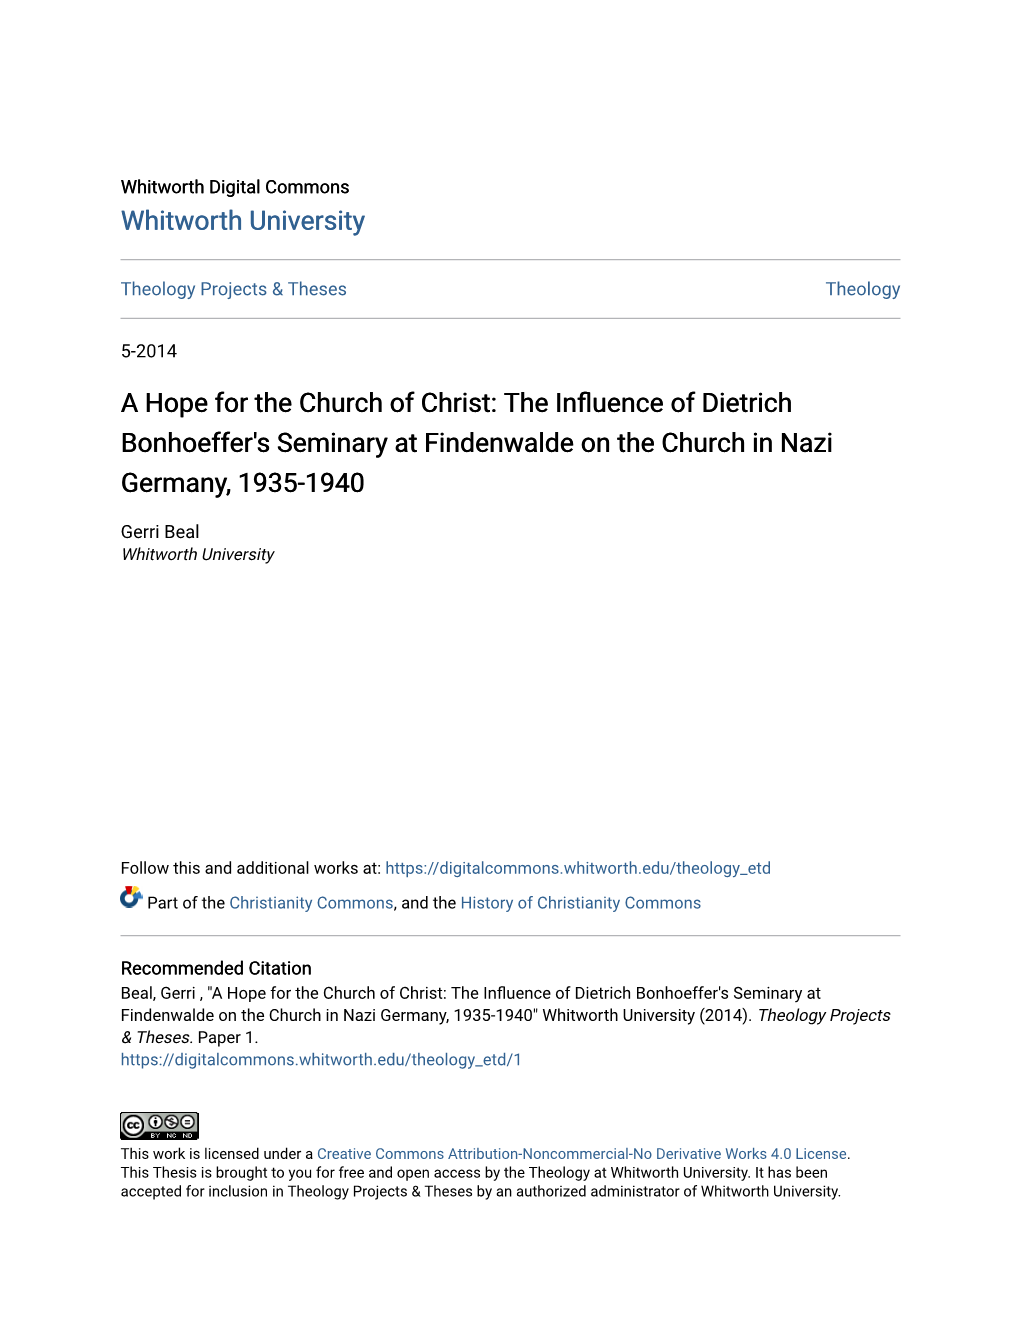 A Hope for the Church of Christ: the Influence of Dietrich Bonhoeffer's Seminary at Findenwalde on the Church in Nazi Germany, 1935-1940